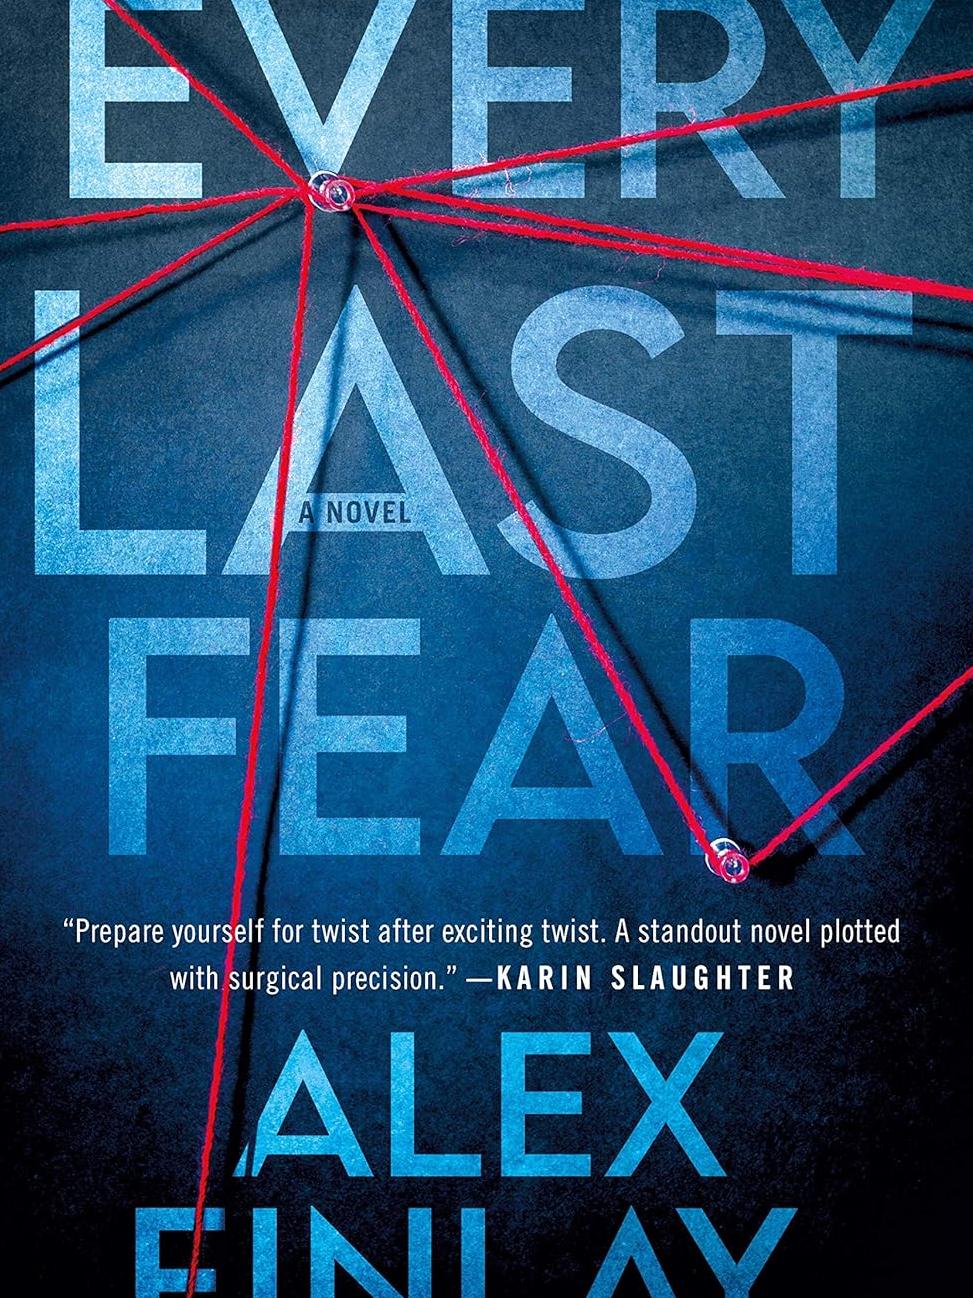 Every Last Fear book cover